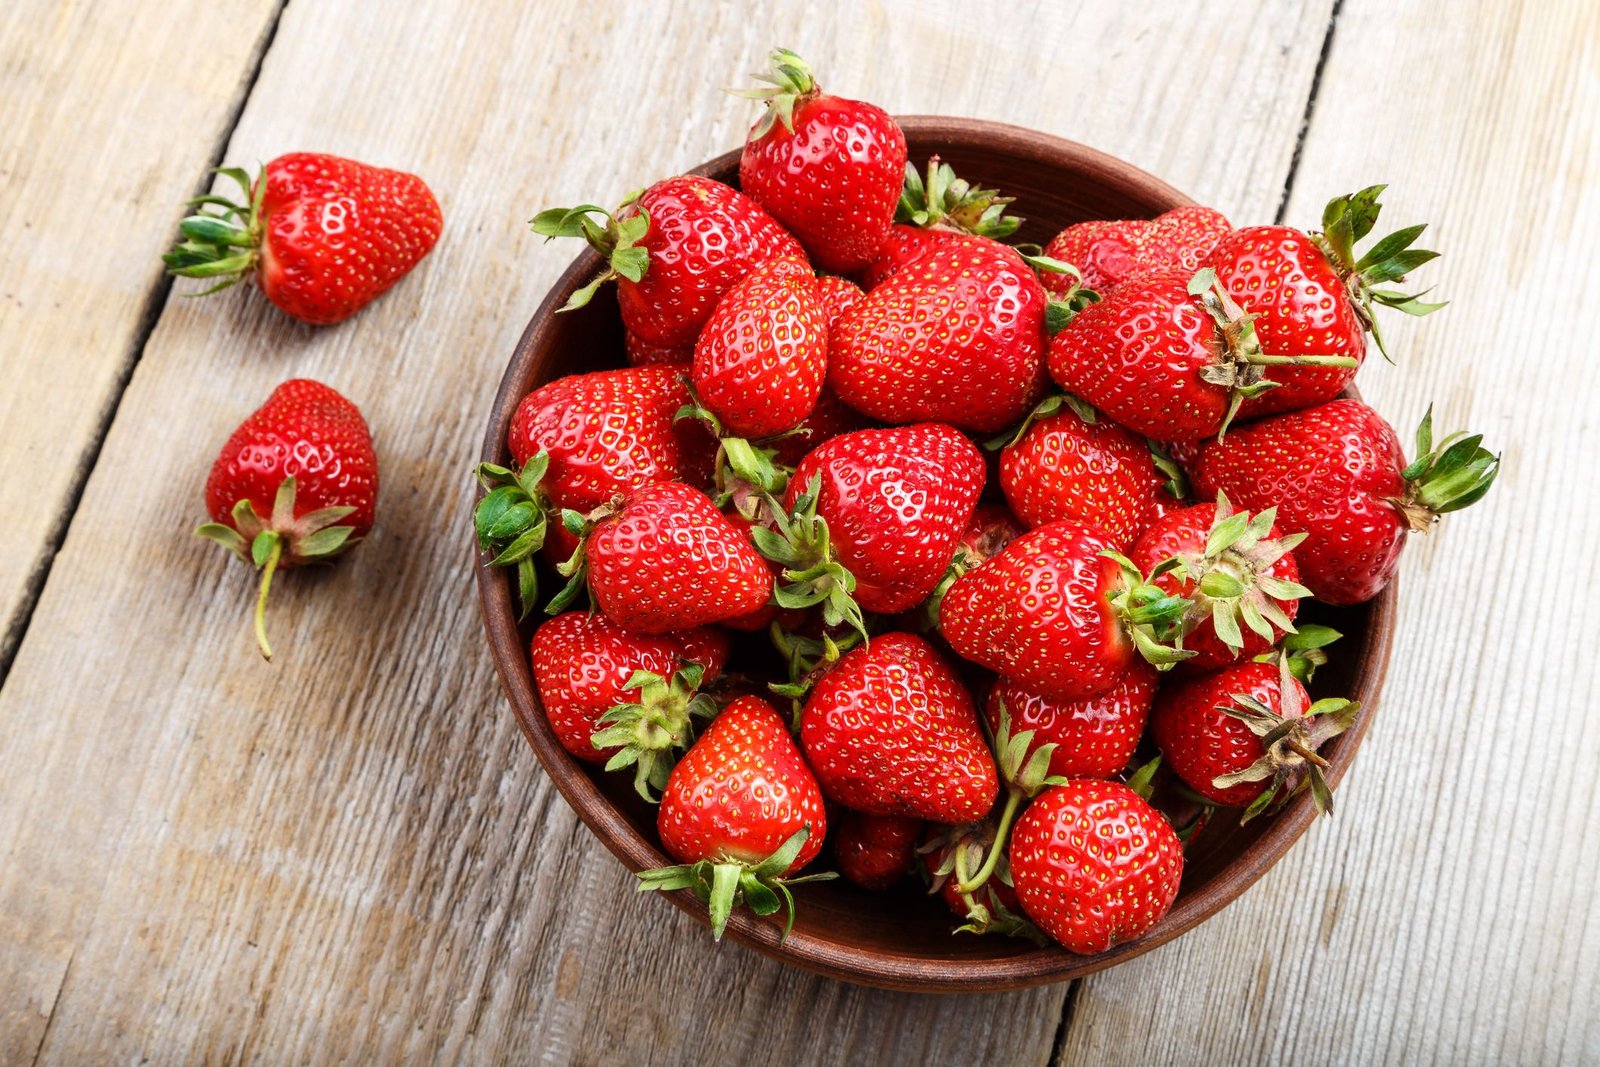 Is Male's Health Benefiting From Strawberries?